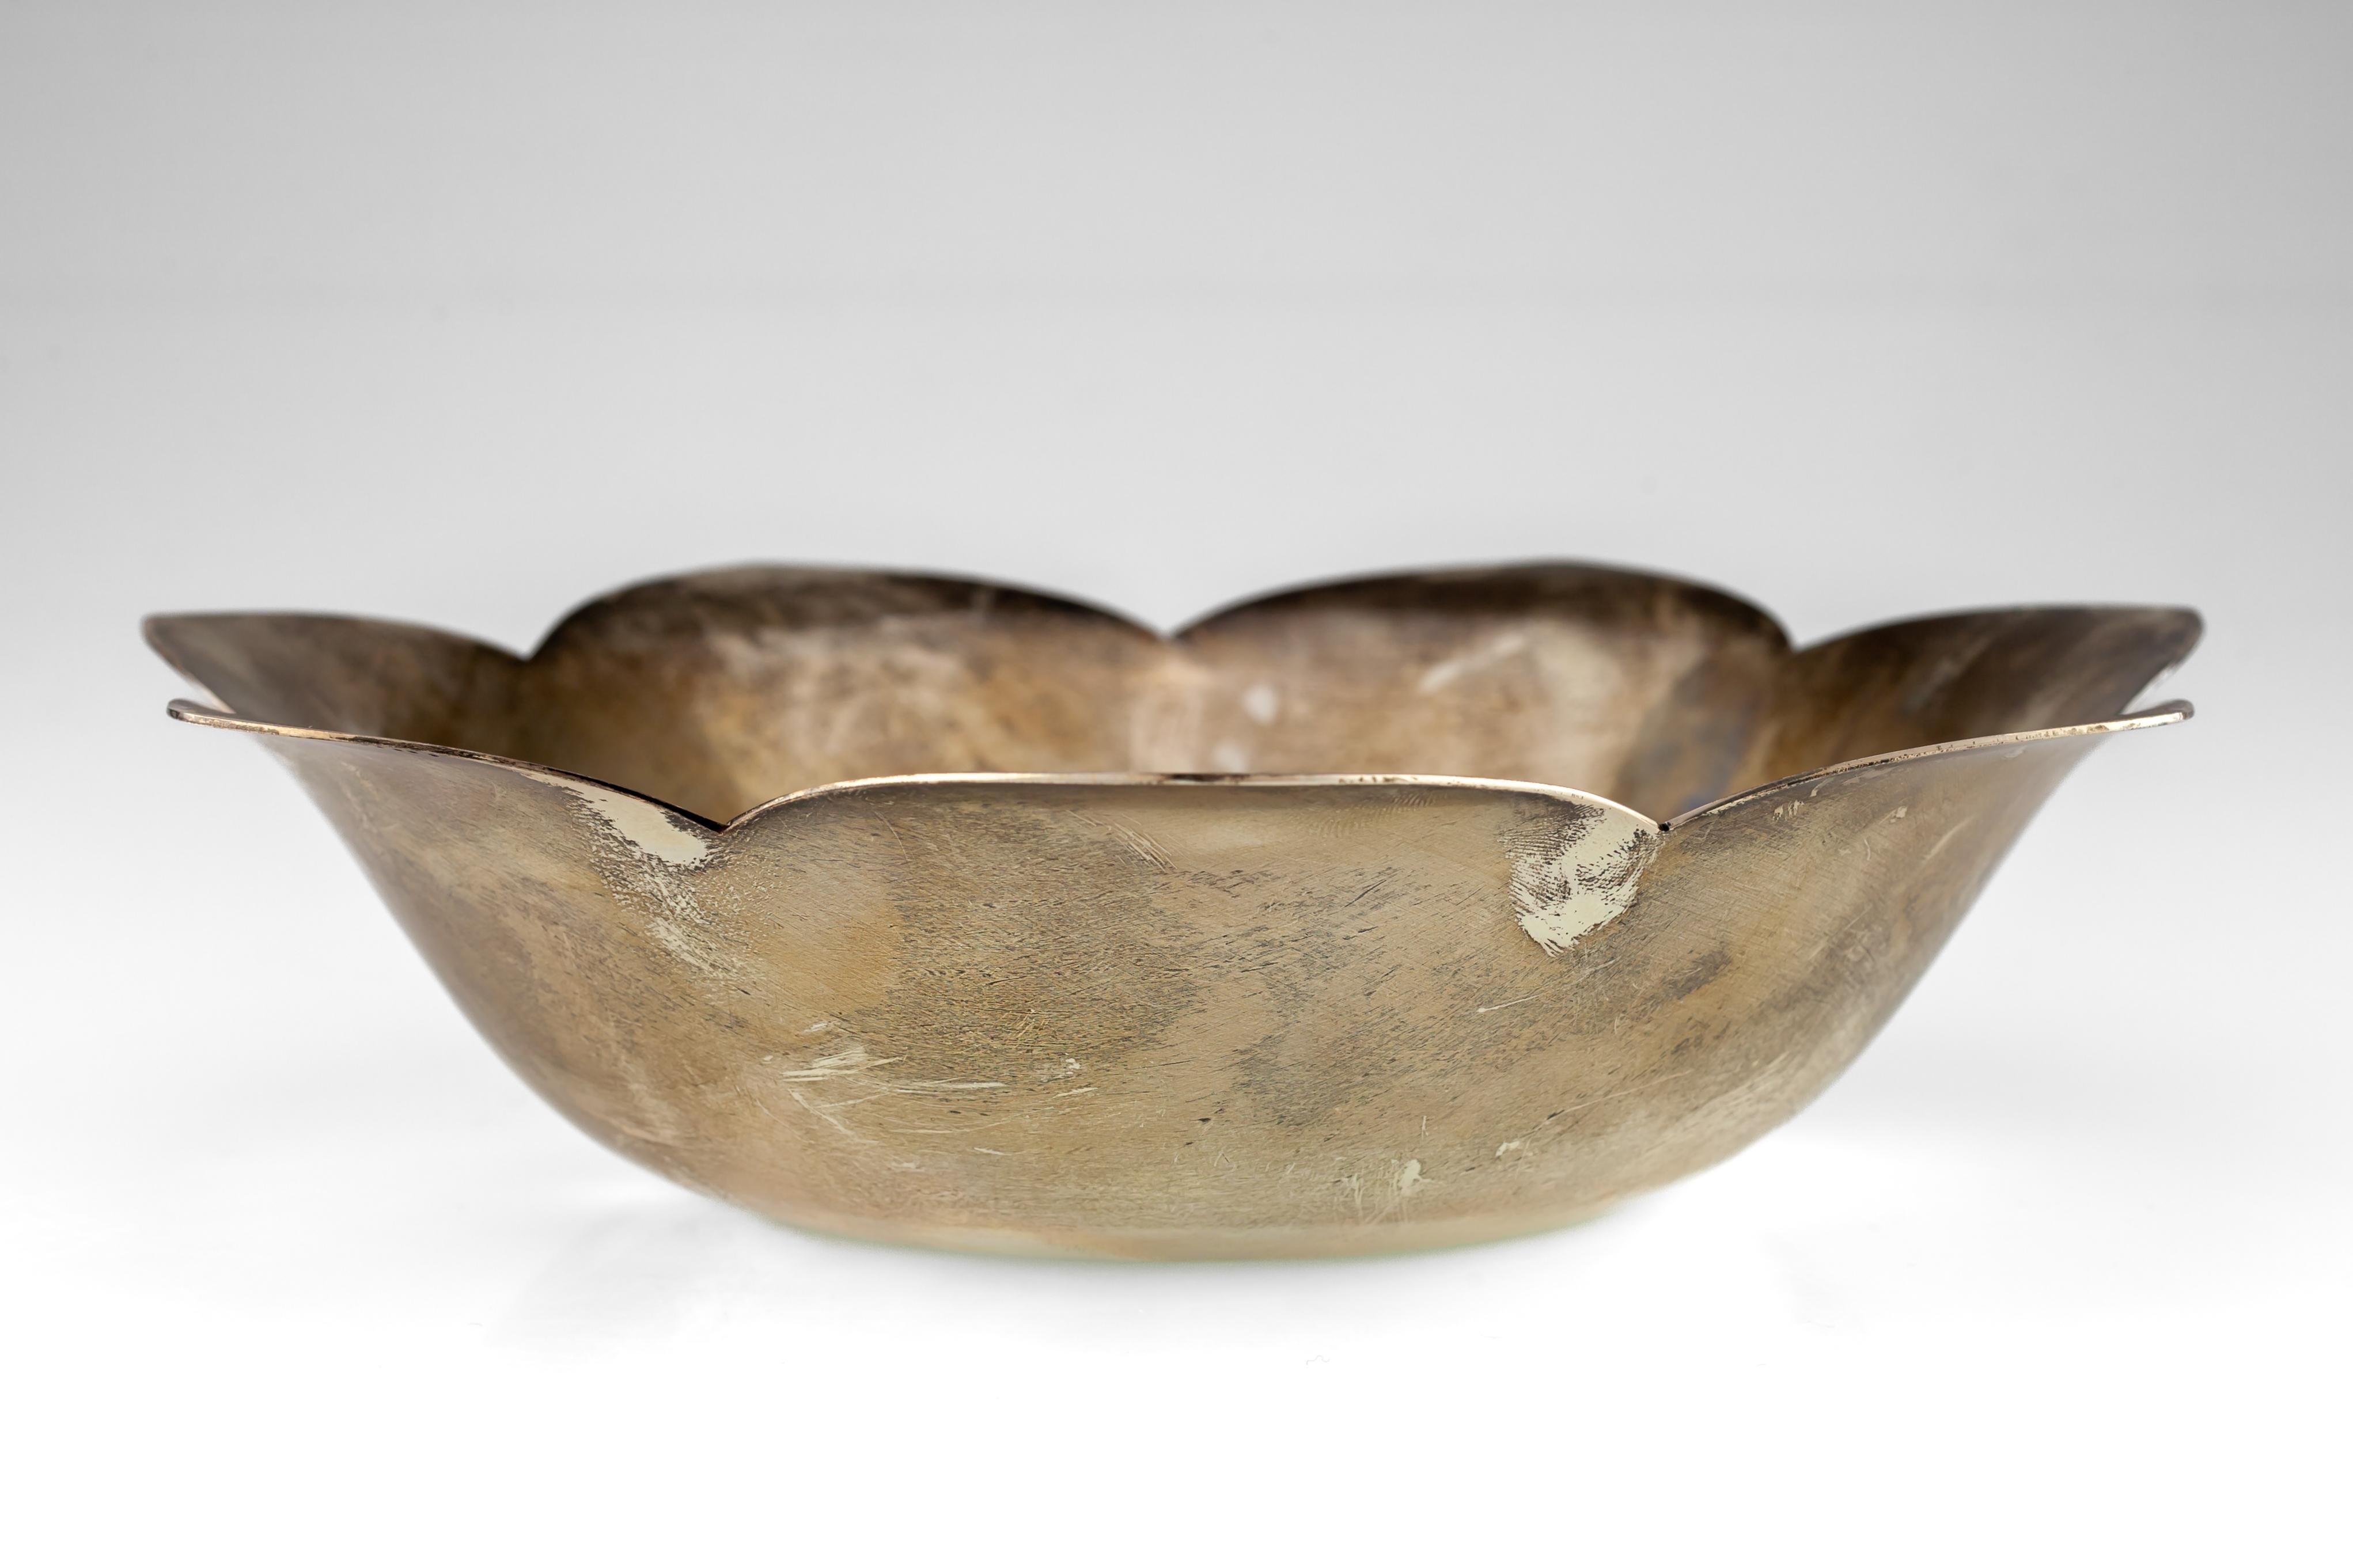 Tiffany Makers Sterling Silver Flower Form Petal Bowl 28889

Gorgeous Flower Pedal Bowl by Tiffany & Co.
Made of sterling silver
In good condition, has some flaws but nothing major
Total Mass: 336.3 grams